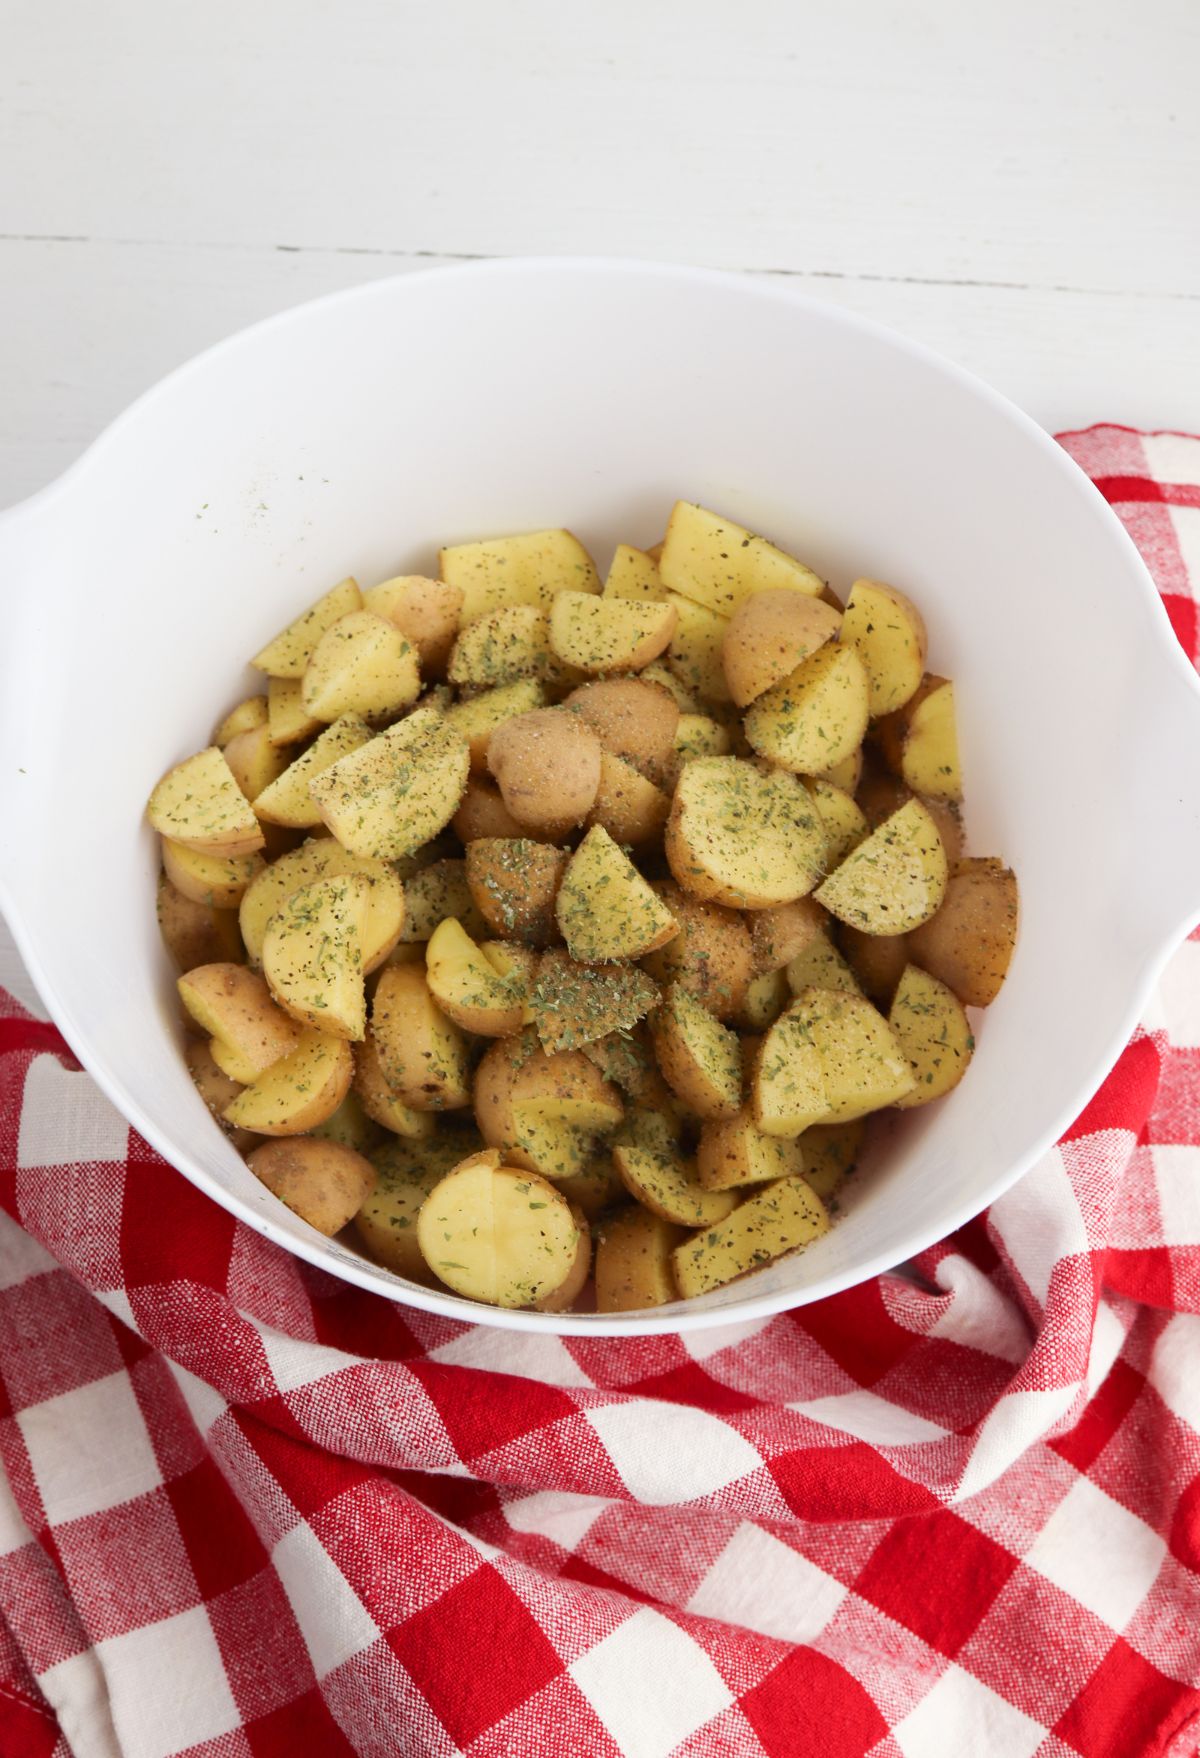 Roasted potatoes in a white bowl on a red and white checkered tablecloth.